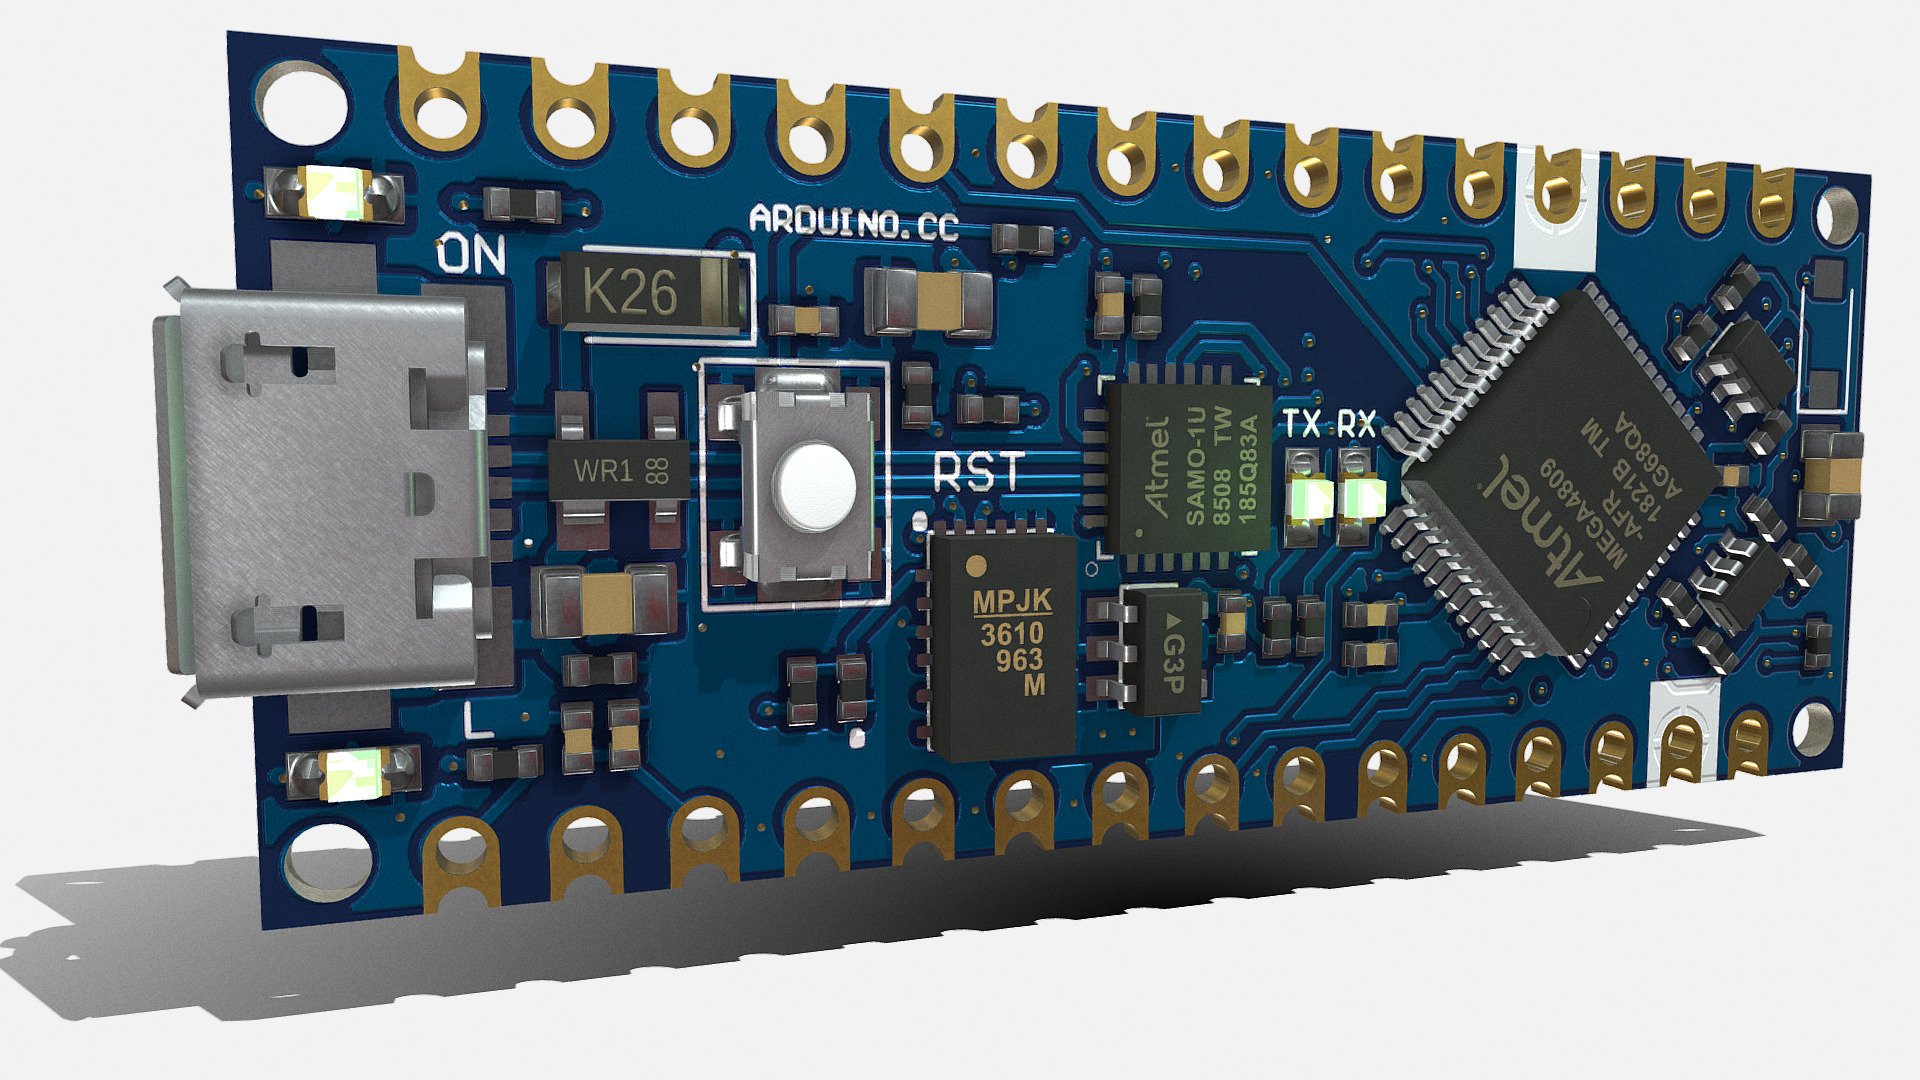 3D Model of the famous ARDUINO NANO EVERY.
Description is visible here : https://store.arduino.cc/products/arduino-nano-every?selectedStore=eu

Model designed from the EAGLE files availble in the web site and with blender tools v2.93.6.

All components can be modified (translate, delete,…). 
Don’t hesitate to comment somes hardware references that you want to see in sketchfab - Arduino Nano Every - Buy Royalty Free 3D model by F2A (@Fa_Sketch) 3d model